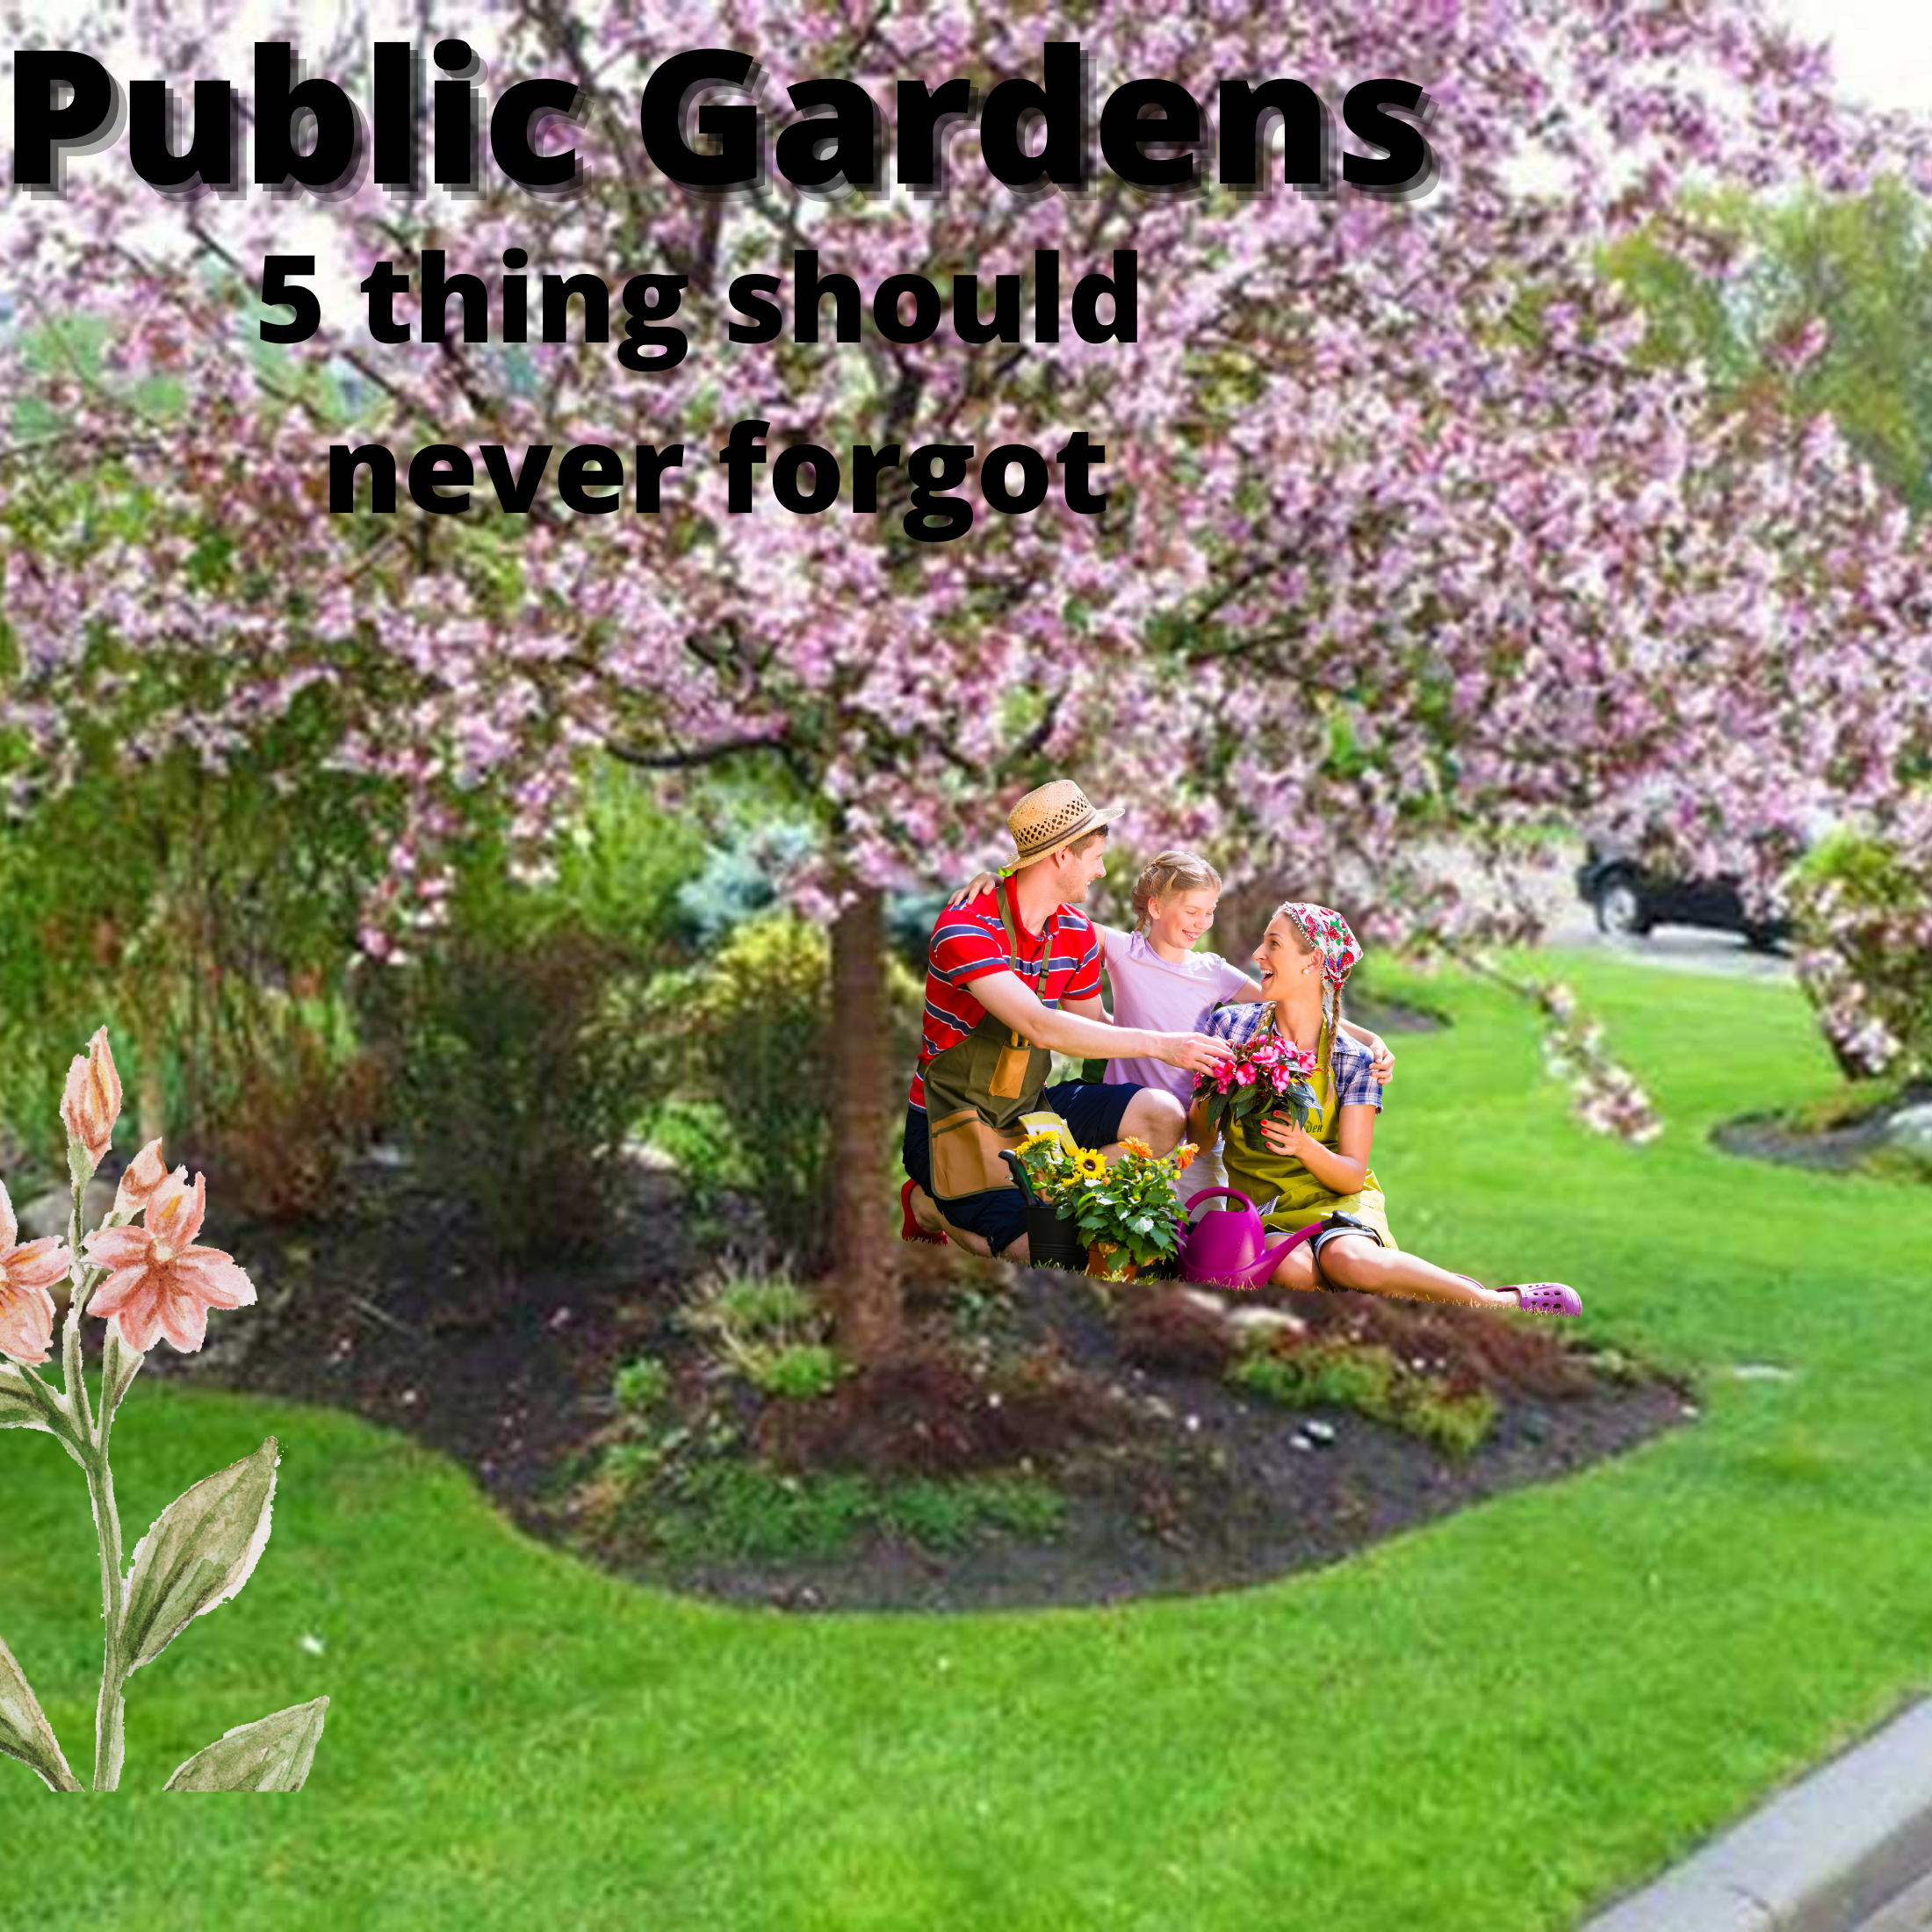 Which thing should we keep in mind while visiting the public garden?